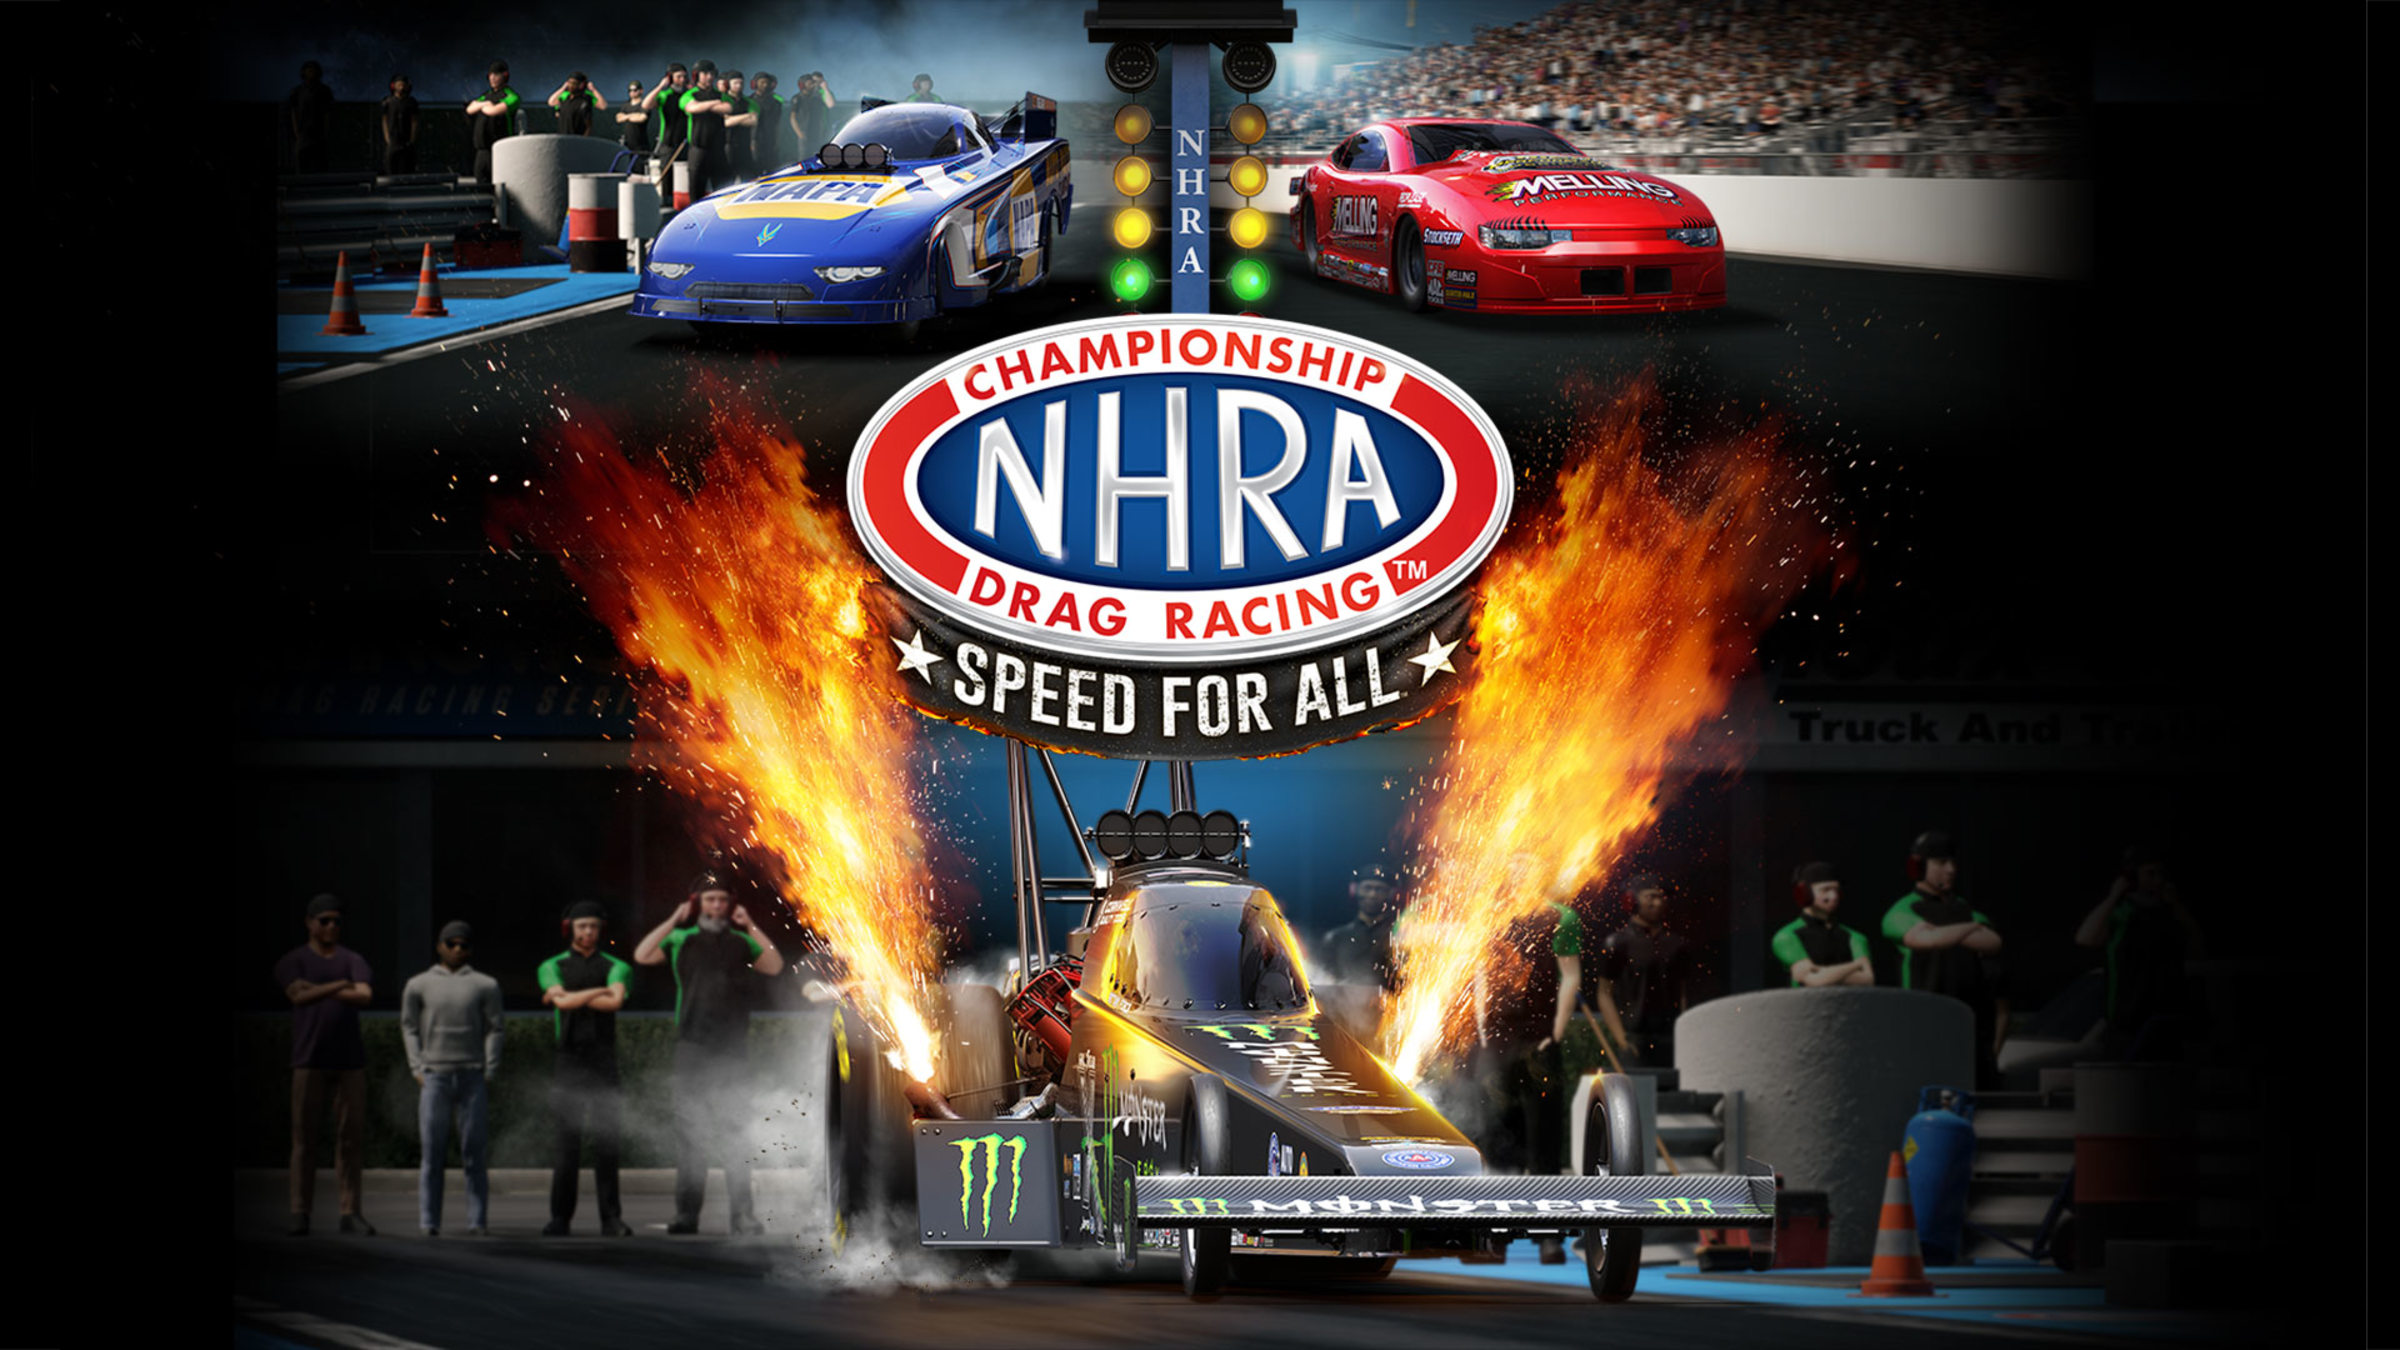 NHRA Championship Drag Racing Speed for All para Nintendo Switch